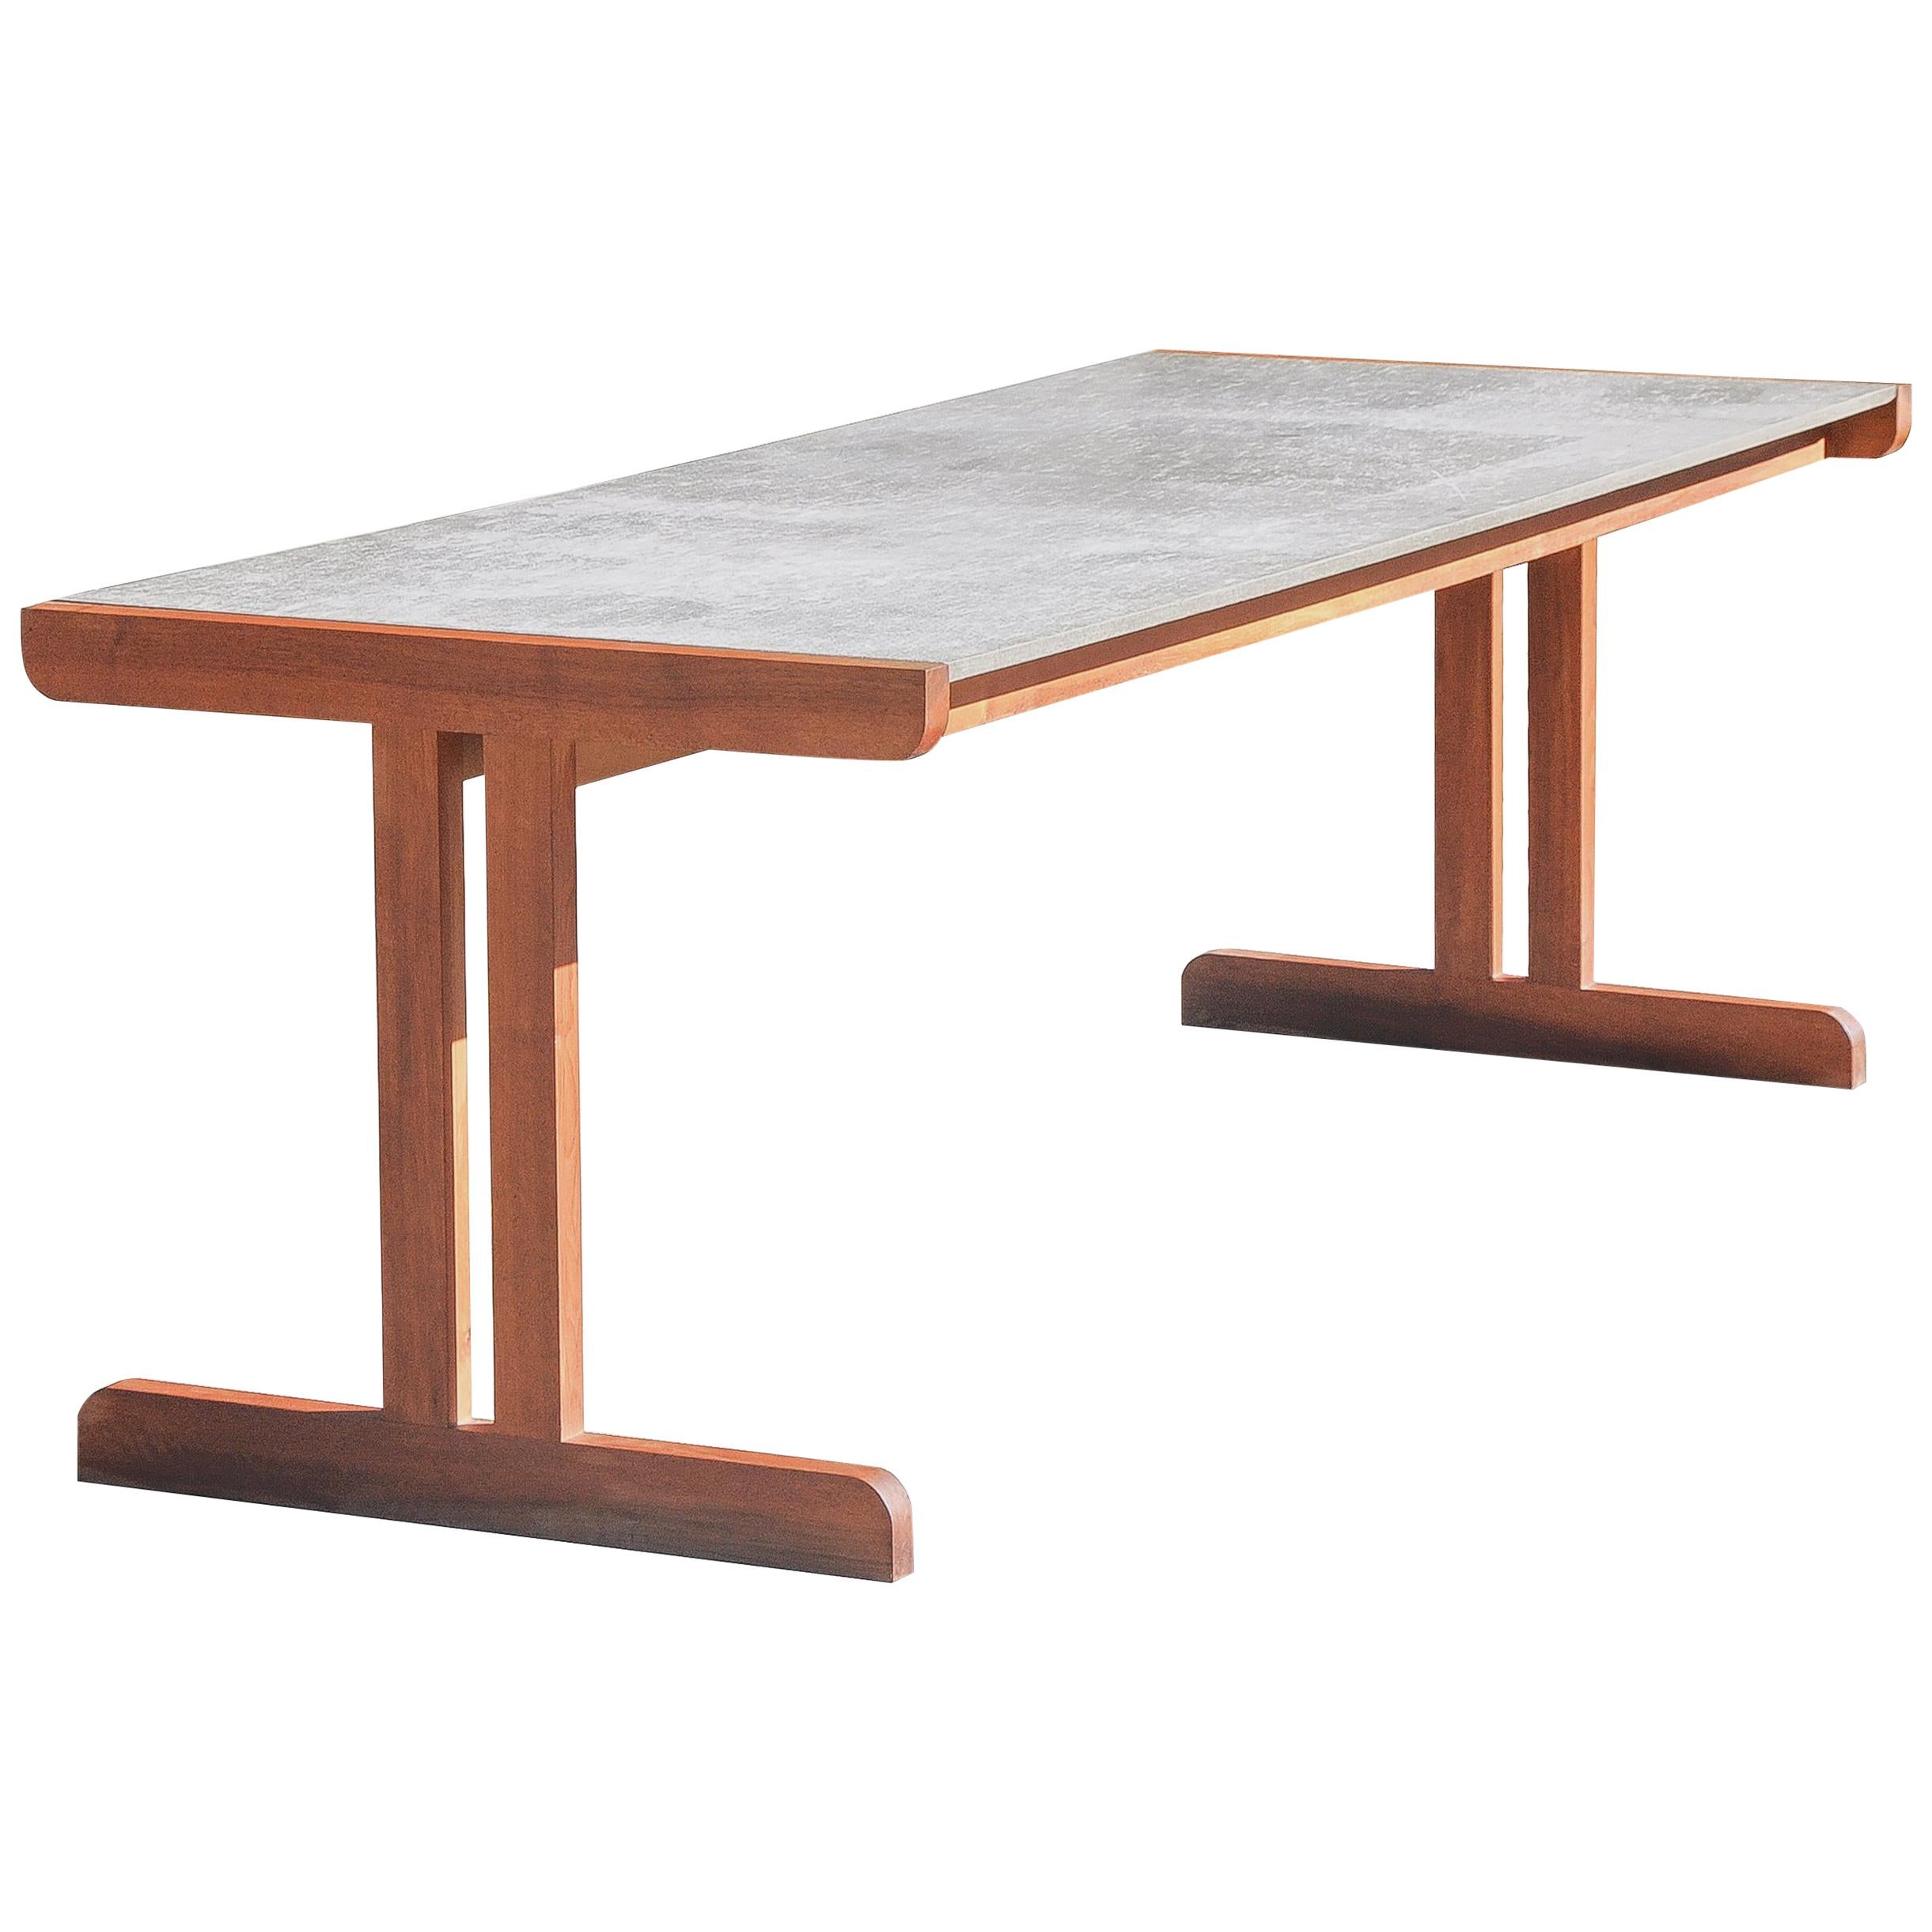 Dining Table Prototype by Benedikt Rohner Made of Walnut and Fibre Cement, 1955 For Sale